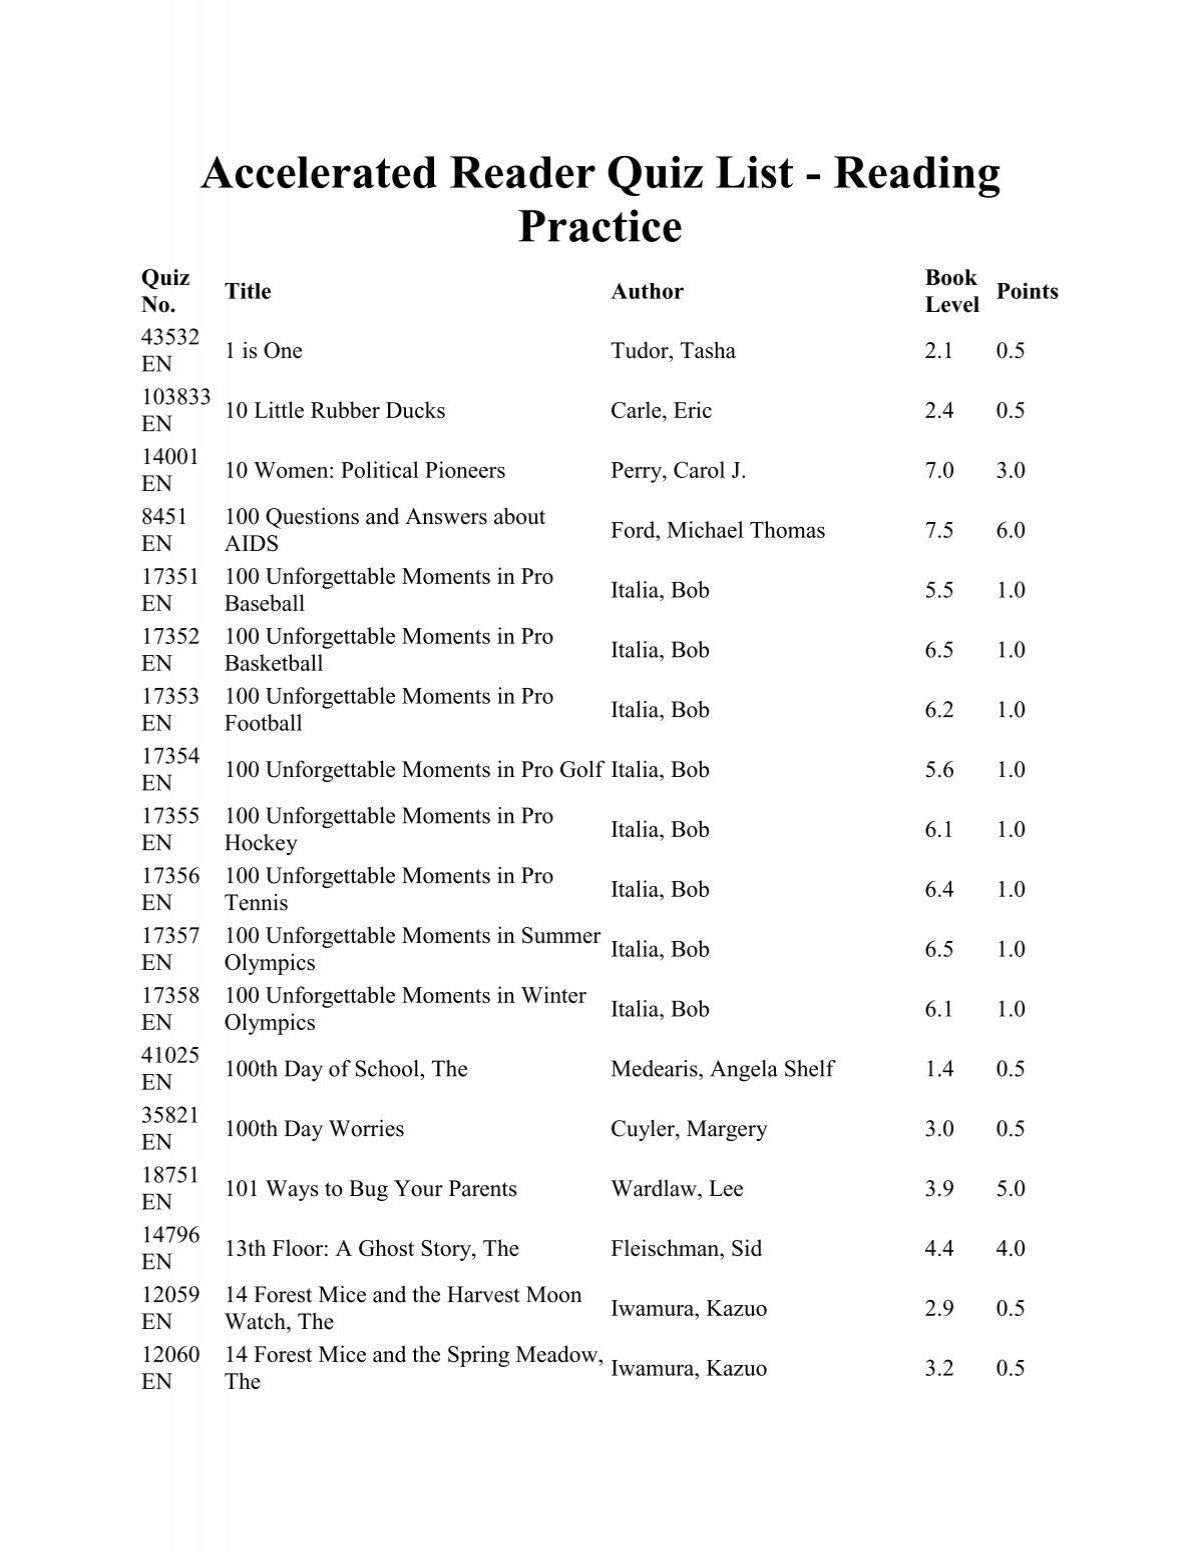 Accelerated Reader Quiz List - Reading Practice - Baby's First Year